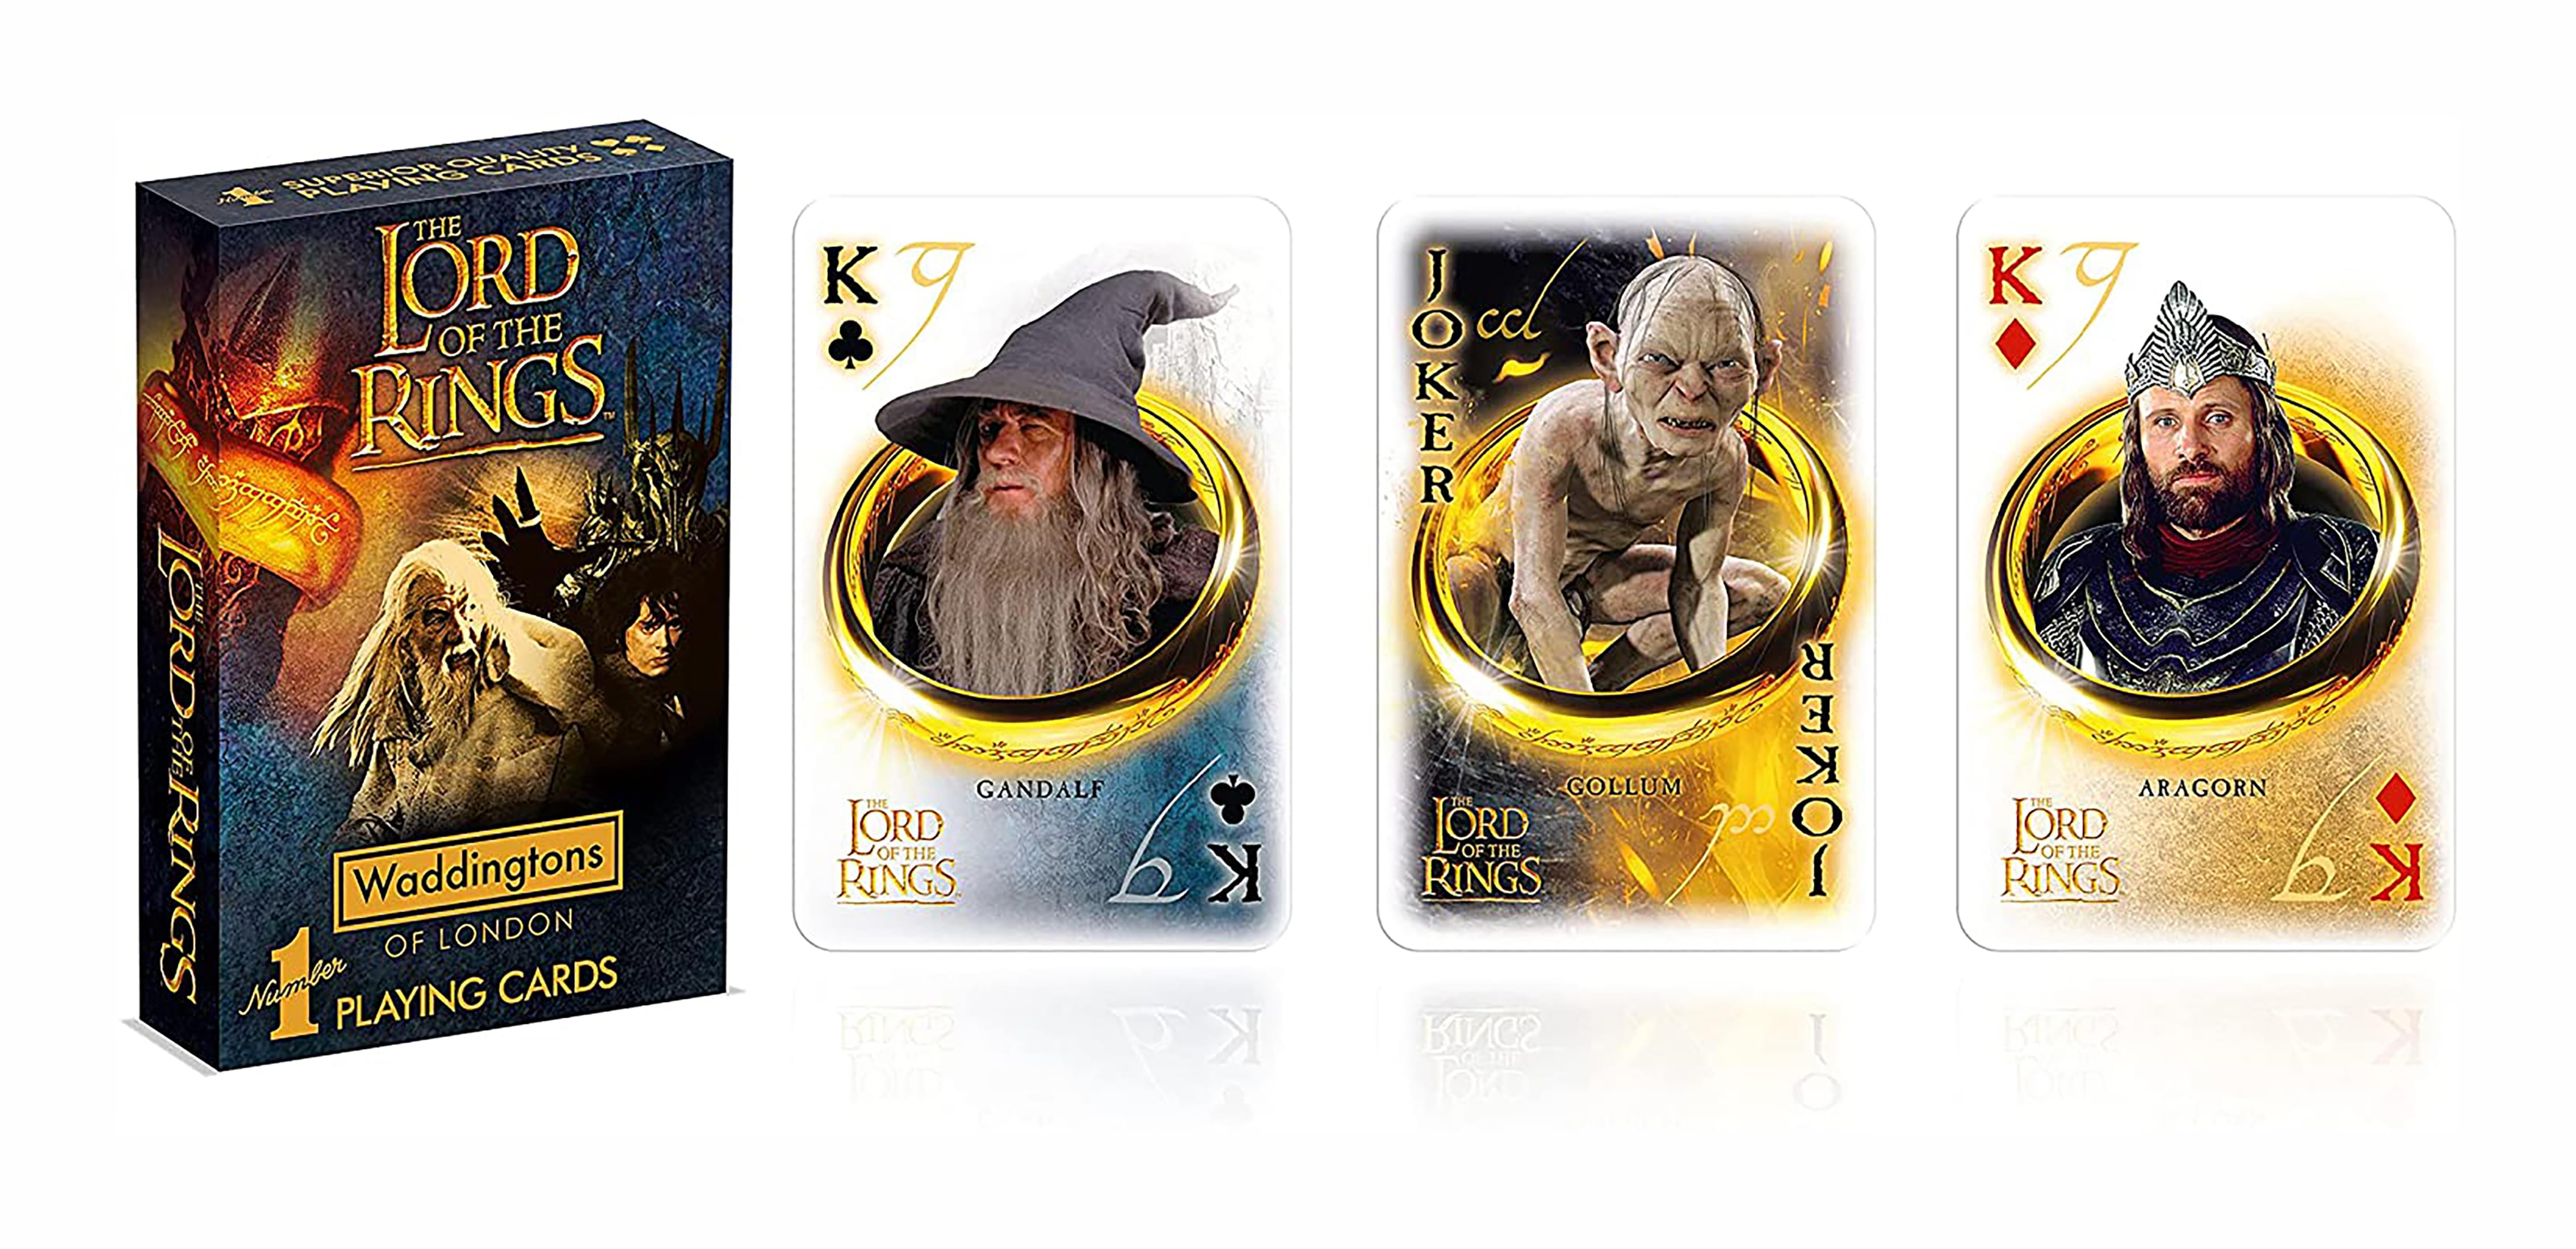 The Lord Of The Rings Waddingtons Number 1 Playing Cards